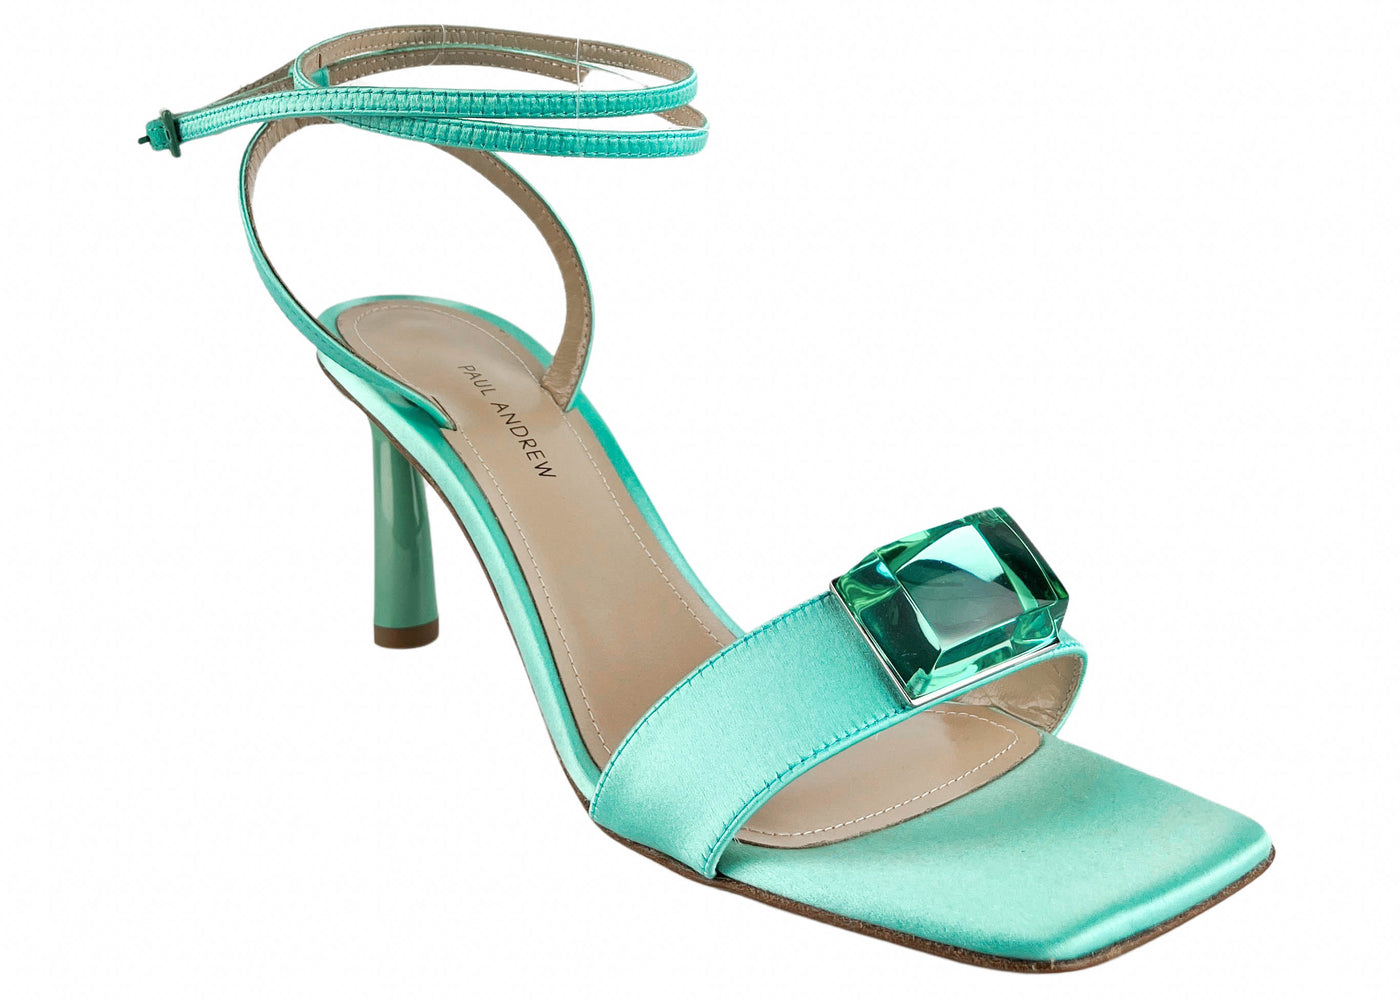 Paul Andrew Strappy Cube Satin Heels in Aqua - Discounts on Paul Andrew at UAL